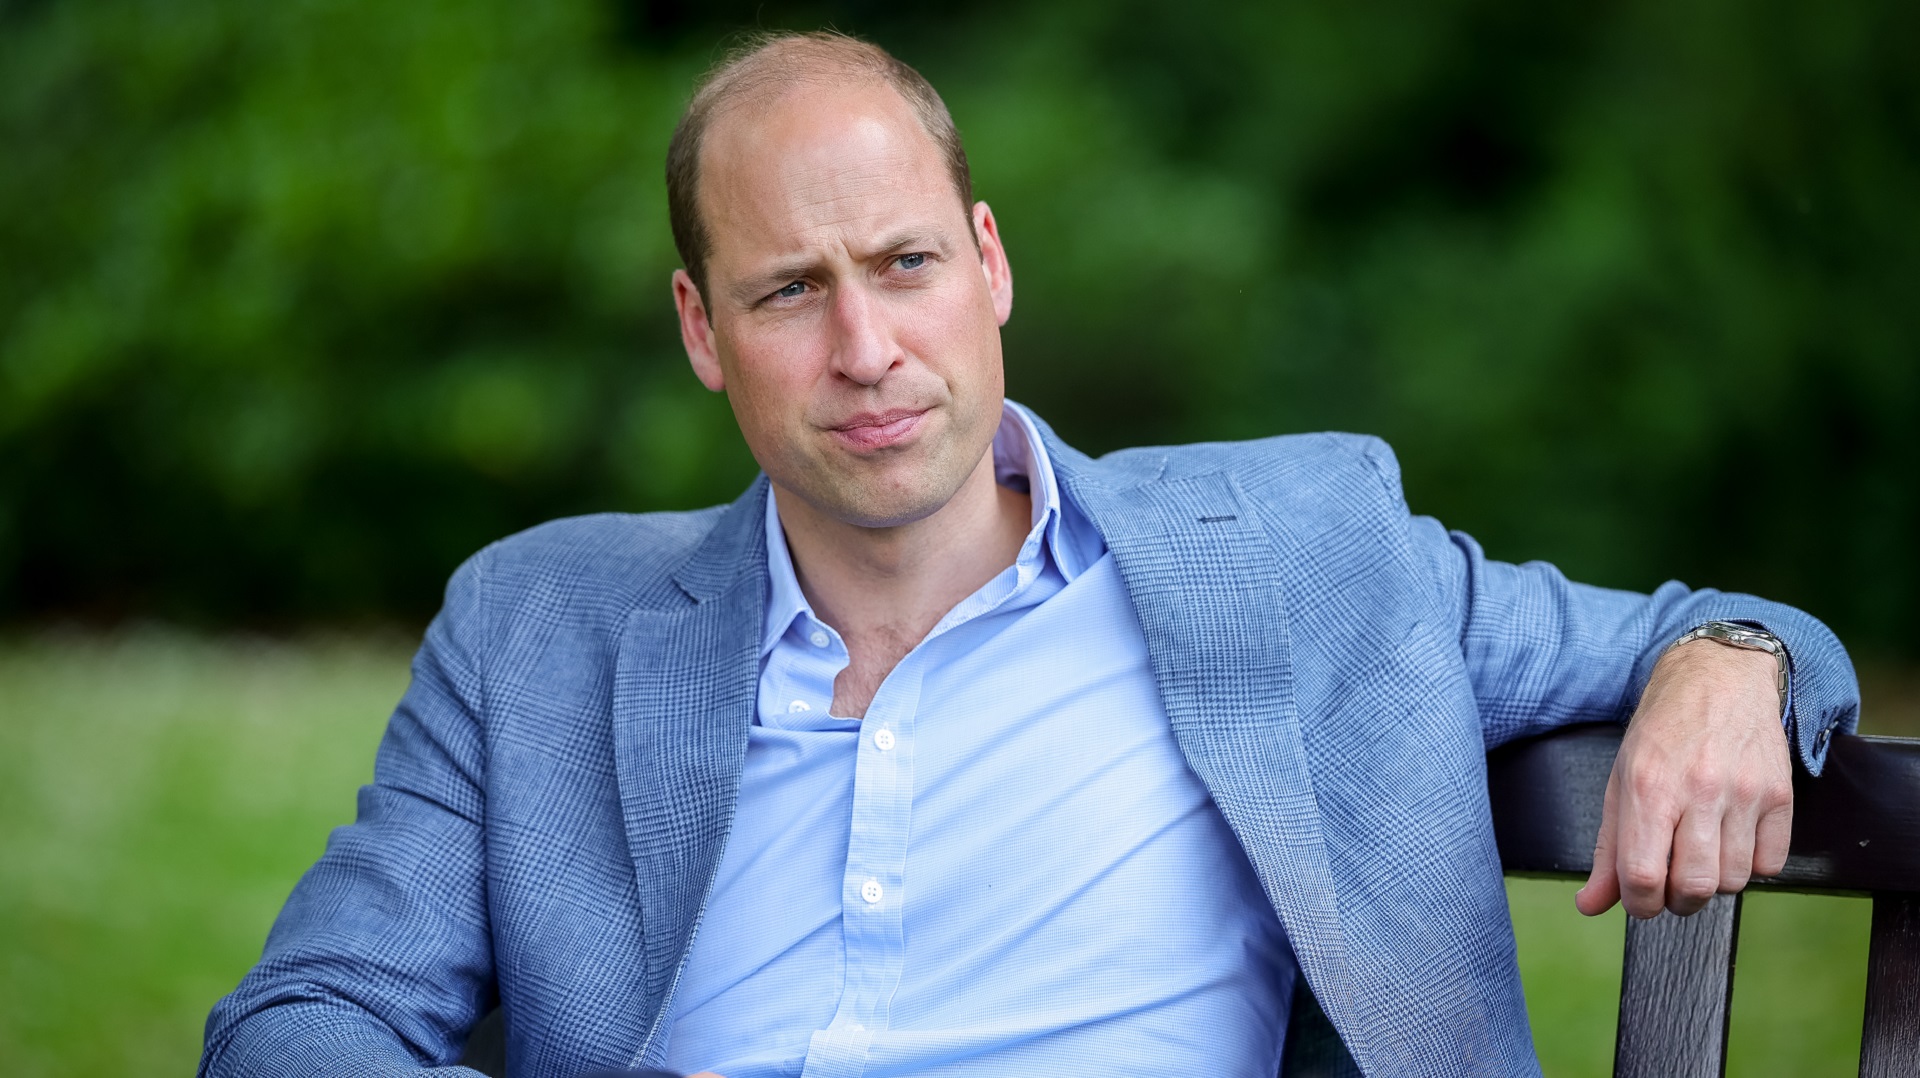 Prince William Launches Plan to End Homelessness